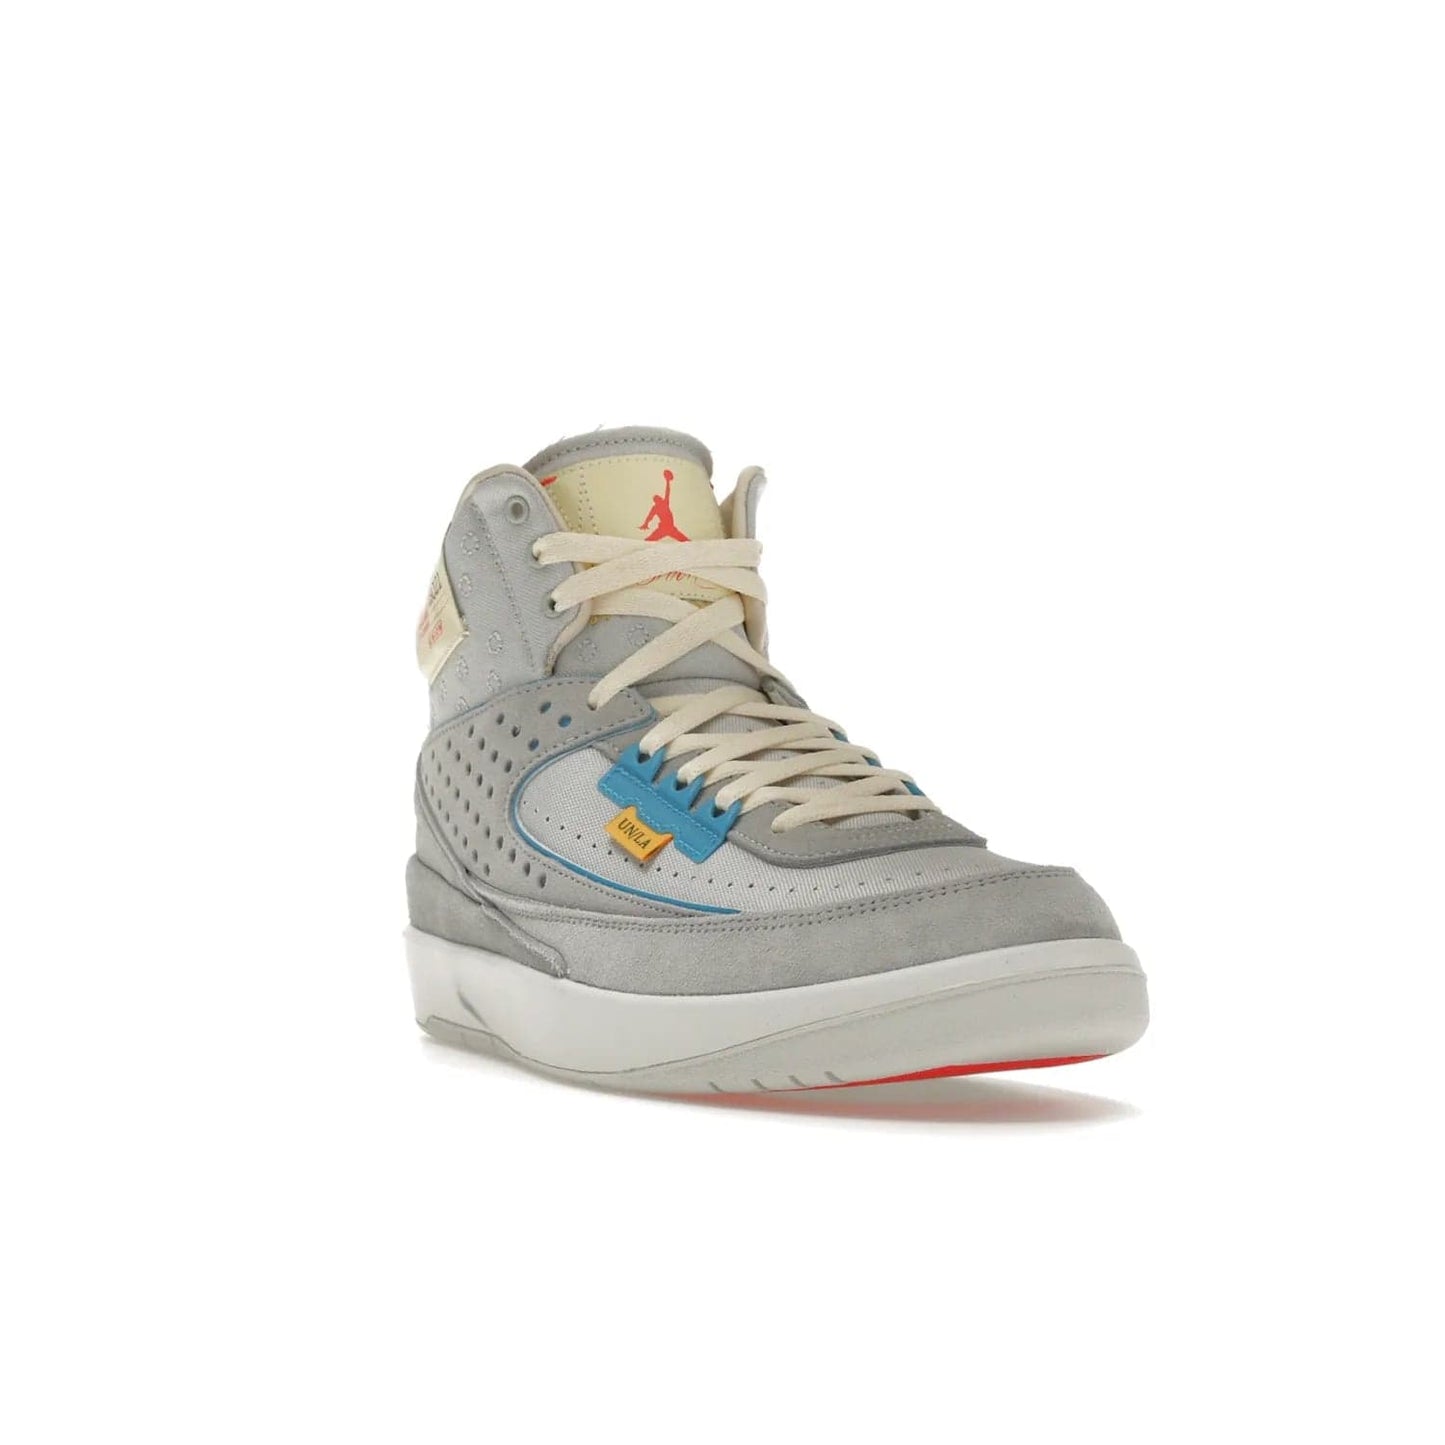 Jordan 2 Retro SP Union Grey Fog - Image 7 - Only at www.BallersClubKickz.com - Introducing the Air Jordan 2 Retro SP Union Grey Fog. This intricate sneaker design features a grey canvas upper with light blue eyelets, eyestay patches, and piping, plus custom external tags. Dropping in April 2022, this exclusive release offers a worn-in look and feel.